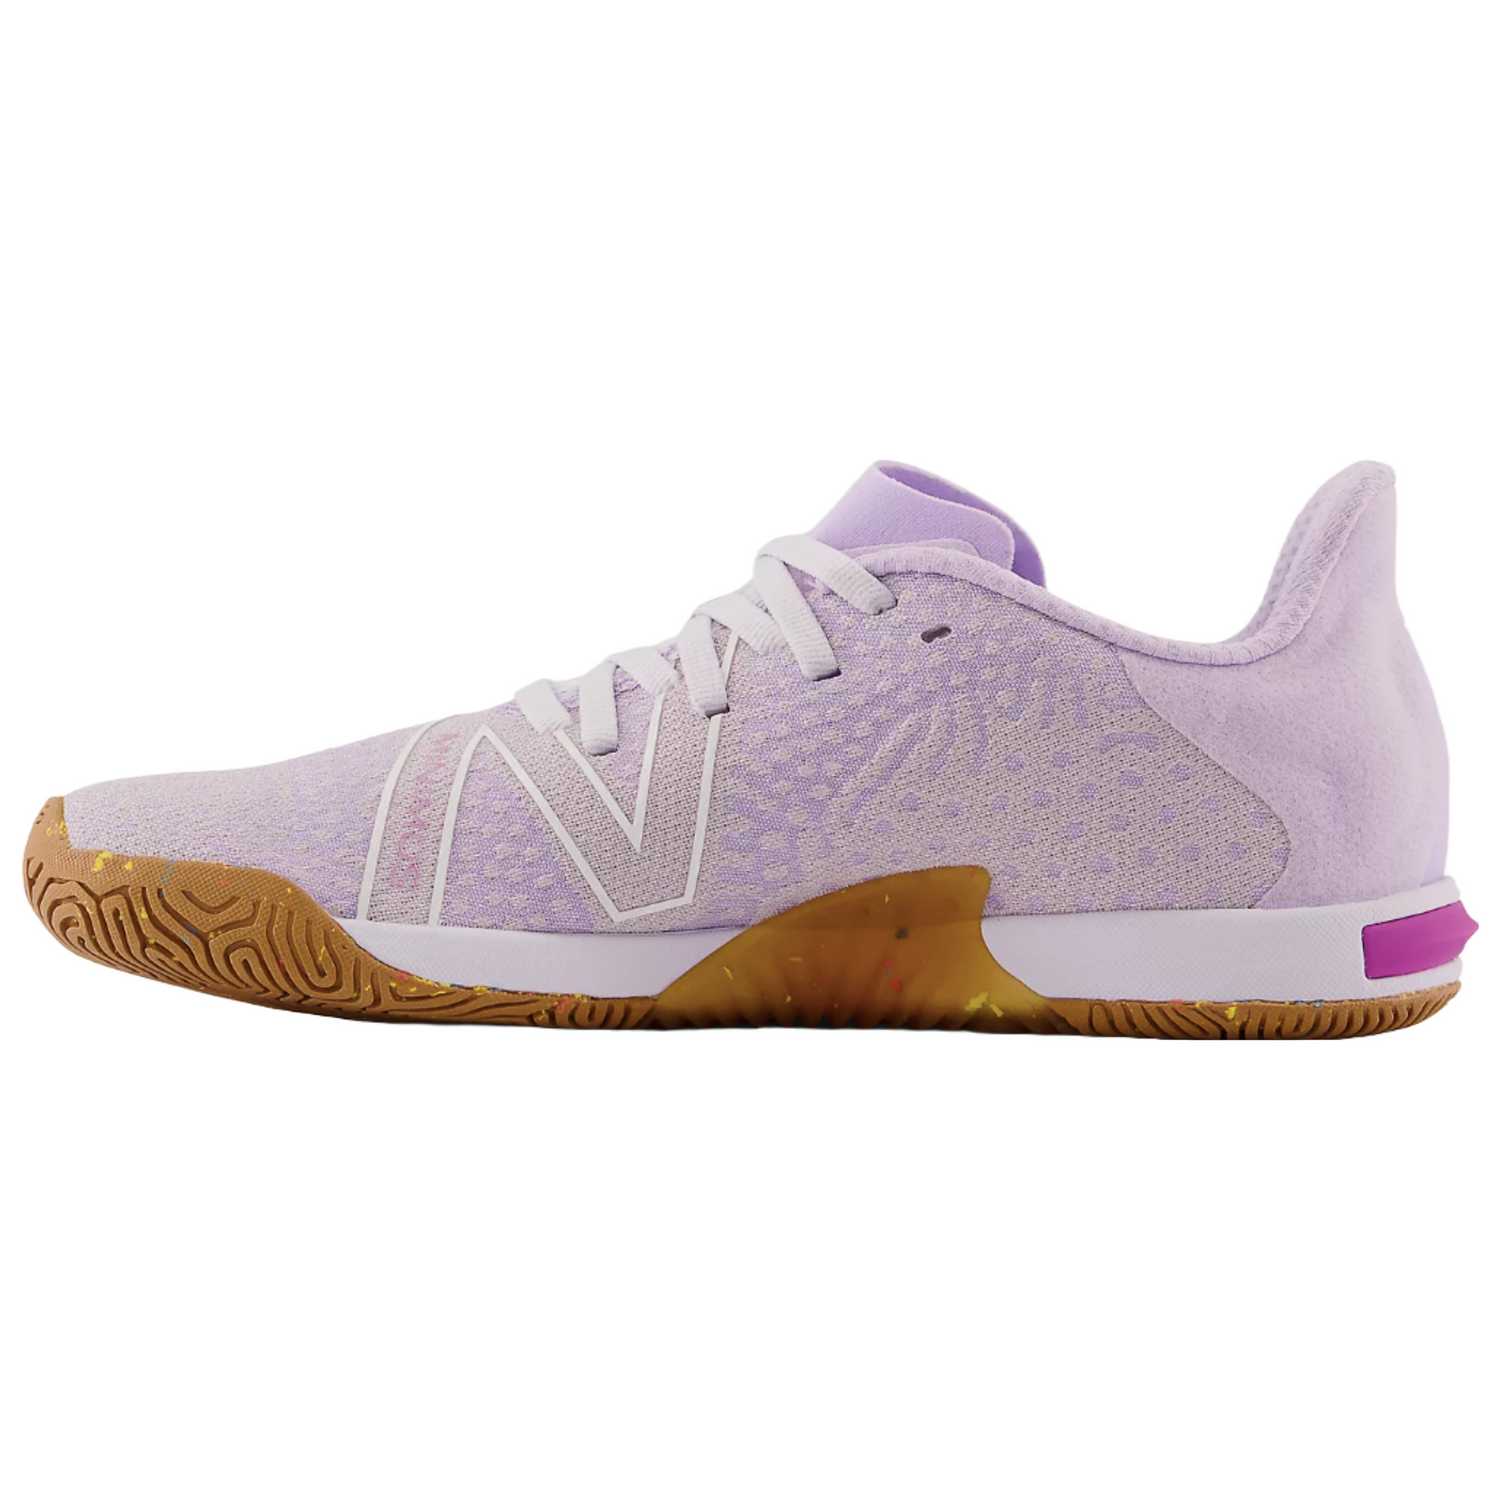 New Balance Women's Minimus Trainer shoes in pink